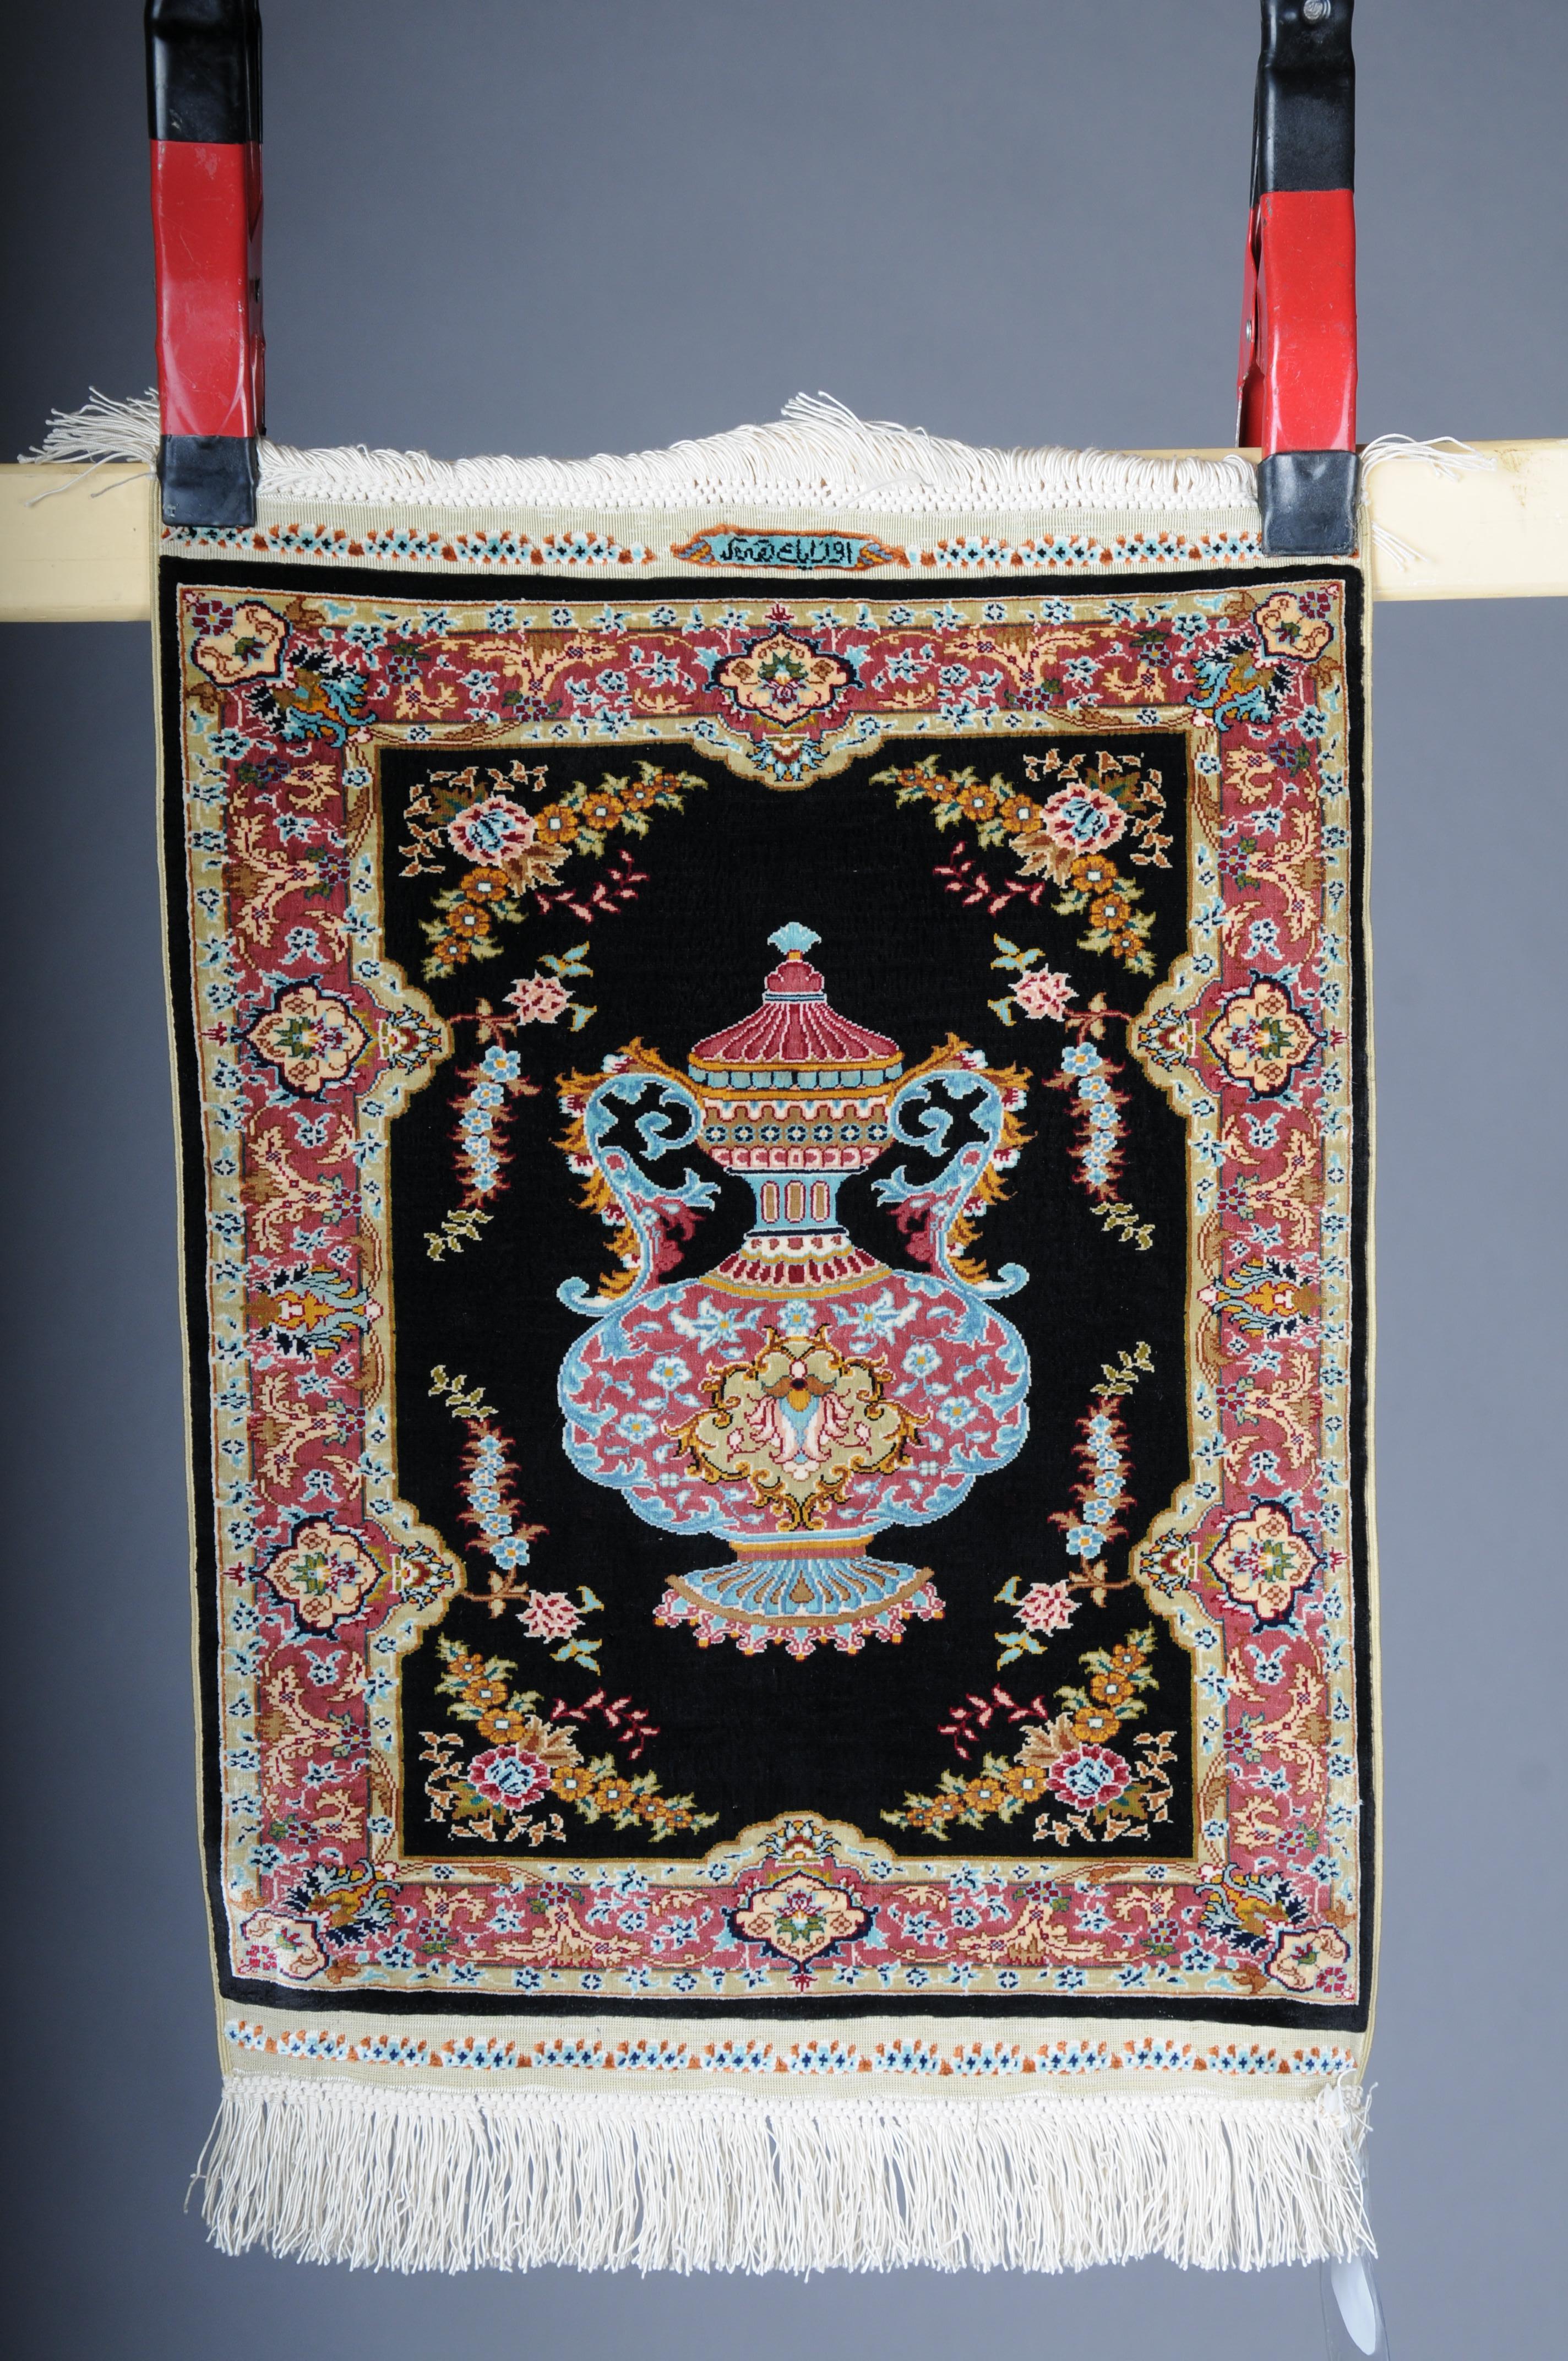 Impressive Ozipek silk carpet/tapestry Hereke signed, 20th Century

This hand-knotted Hereke rug is a magnificent addition to your living space. Once intended for imperial palaces, the detailed work of art now decorates your home. Only natural